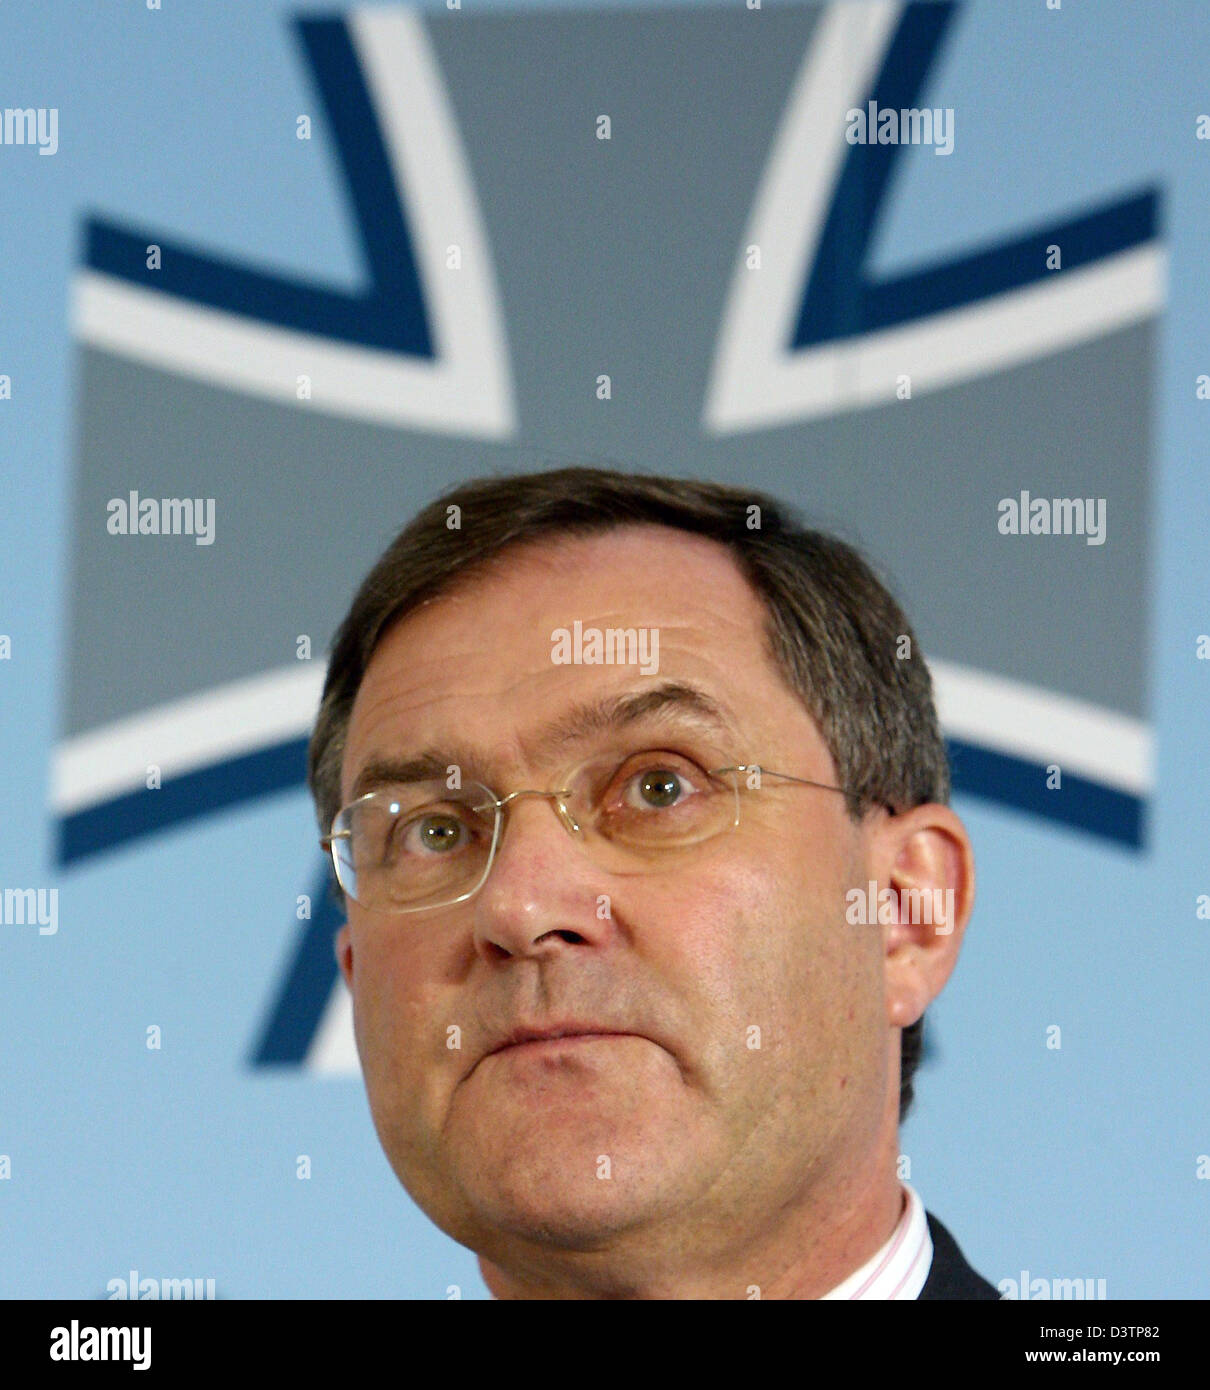 Minister of Defence Franz Josef Jung delivers a press statement in Berlin, Germany, Friday 27 October 2006. Jung suspended two members of the German Armed Forces from office. Both were involved in the desecration of a corpse in Afghanistan. Photo: Steffen Kugler Stock Photo